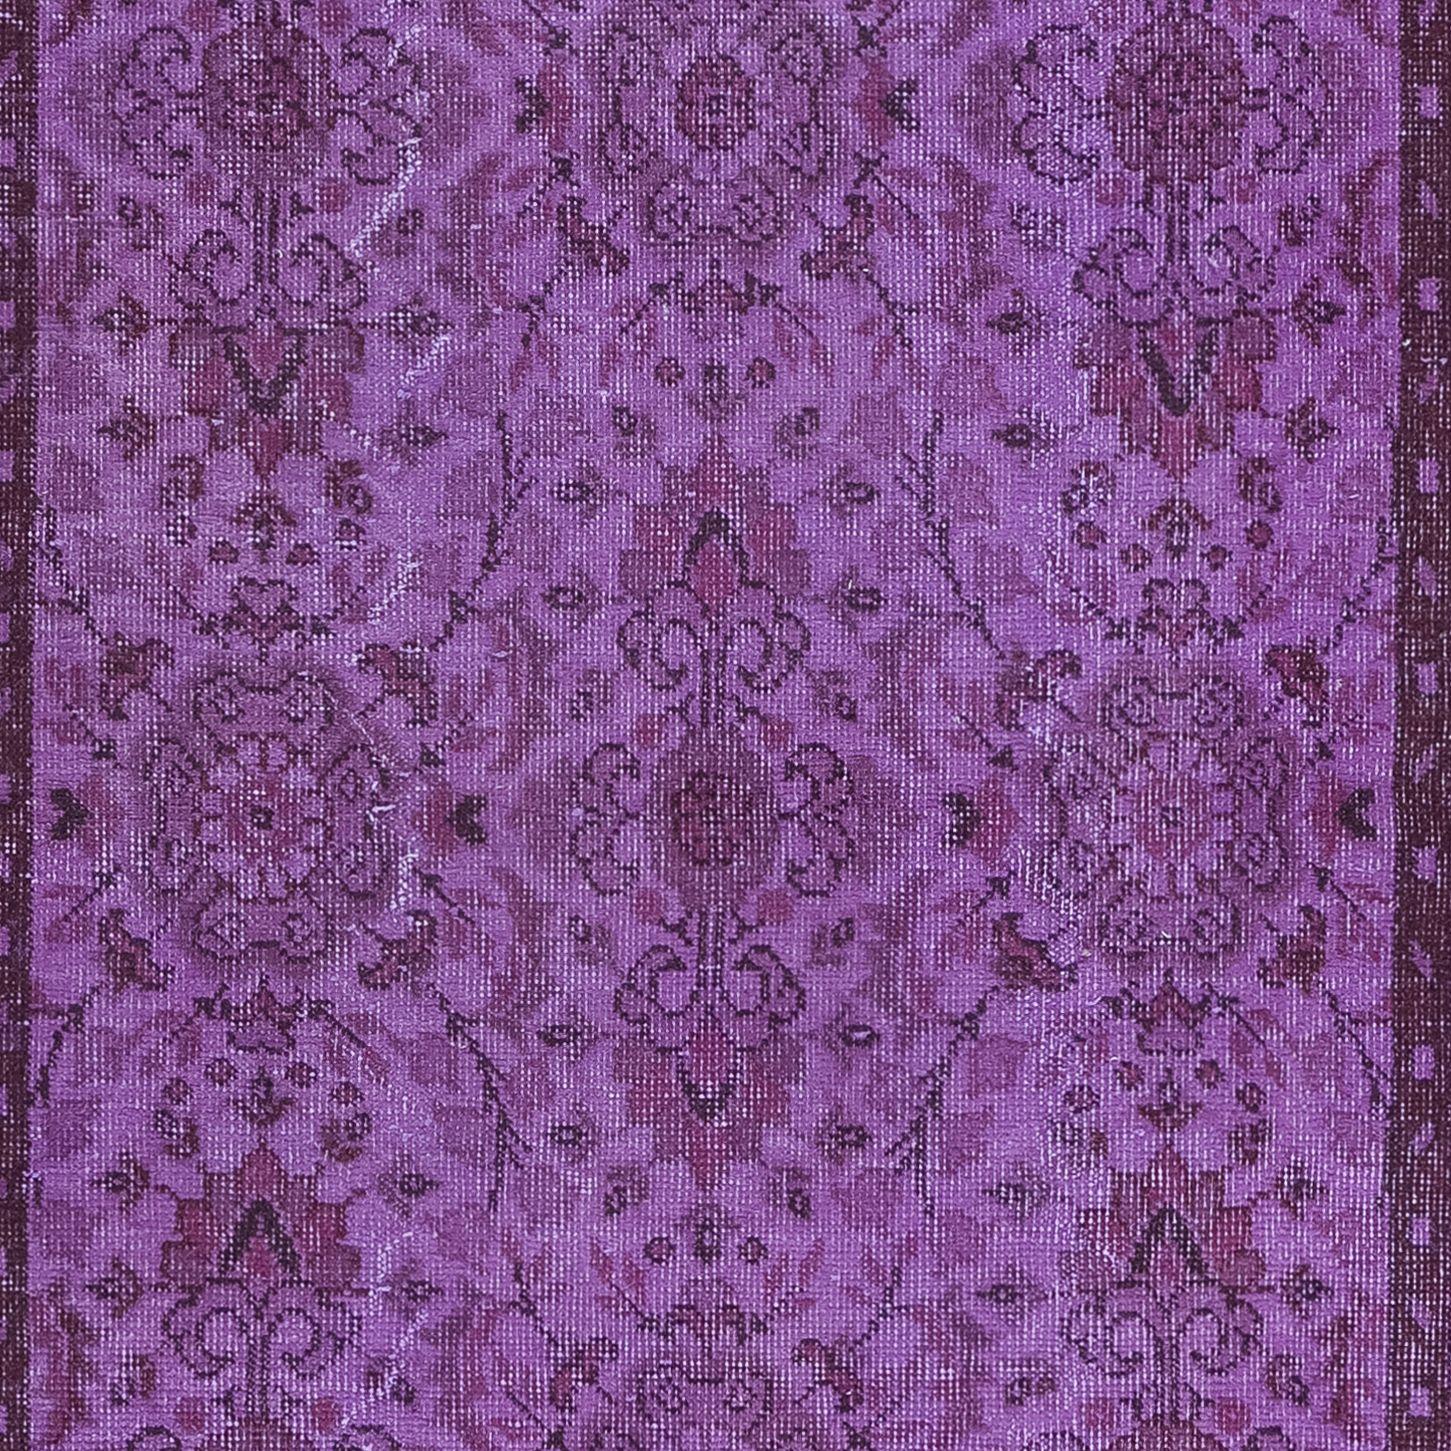 Turkish 3.7x6.8 Ft Floral Area Rug in Purple for Modern Interiors, HandKnotted in Turkey For Sale